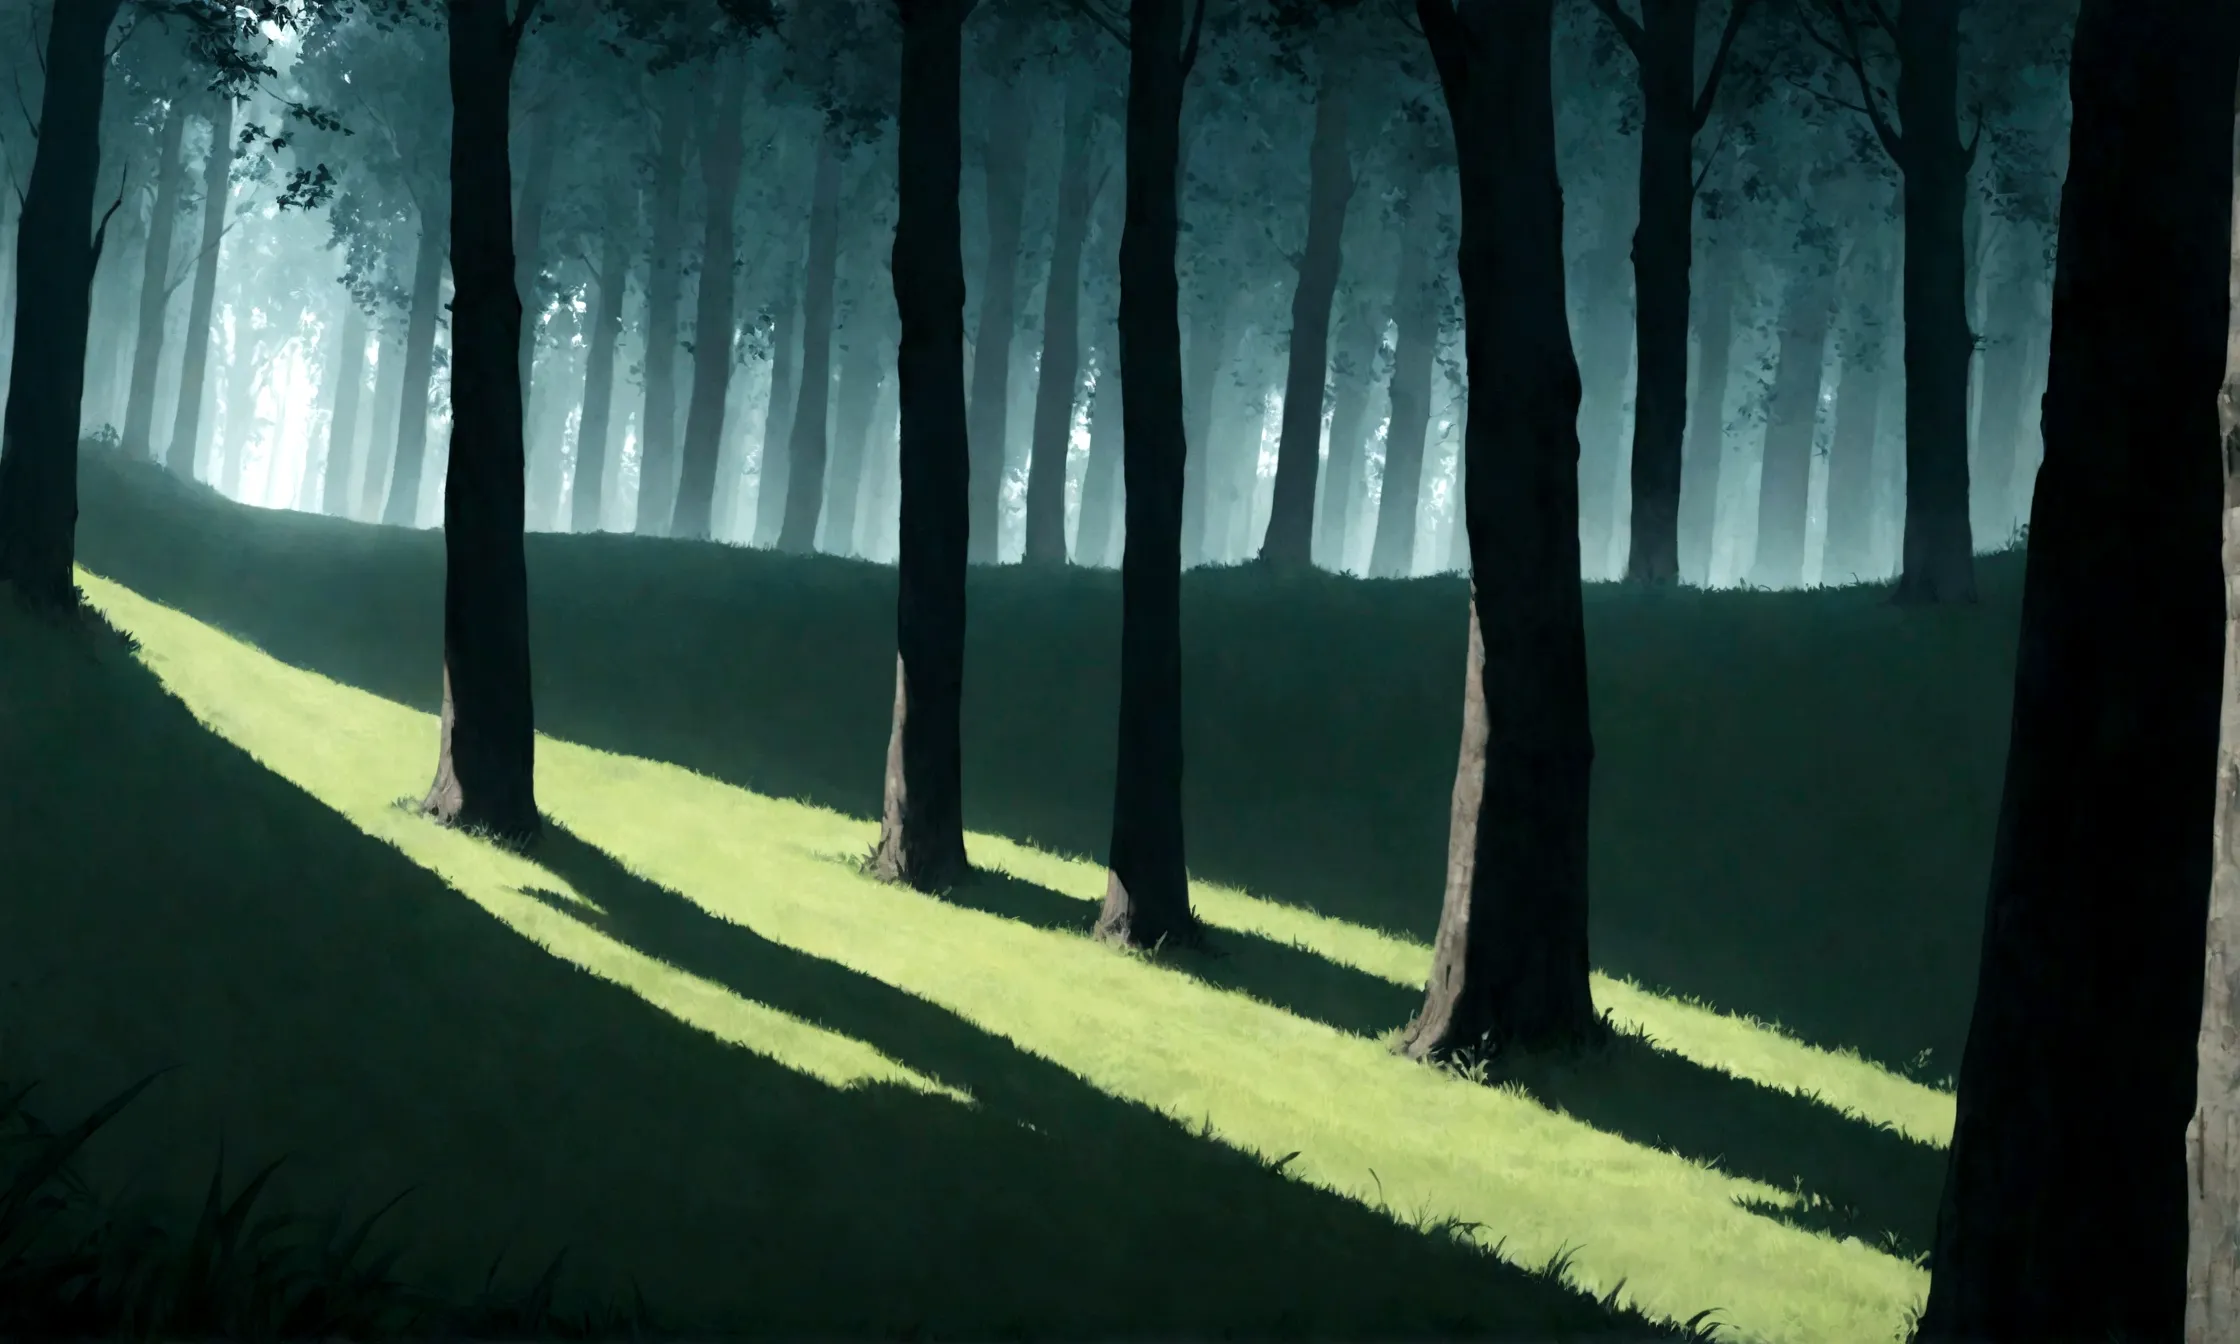 Dense, dark forest seen from the edge of a bright grassy field, the trees forming a thick, shadowy wall --ar 16:9